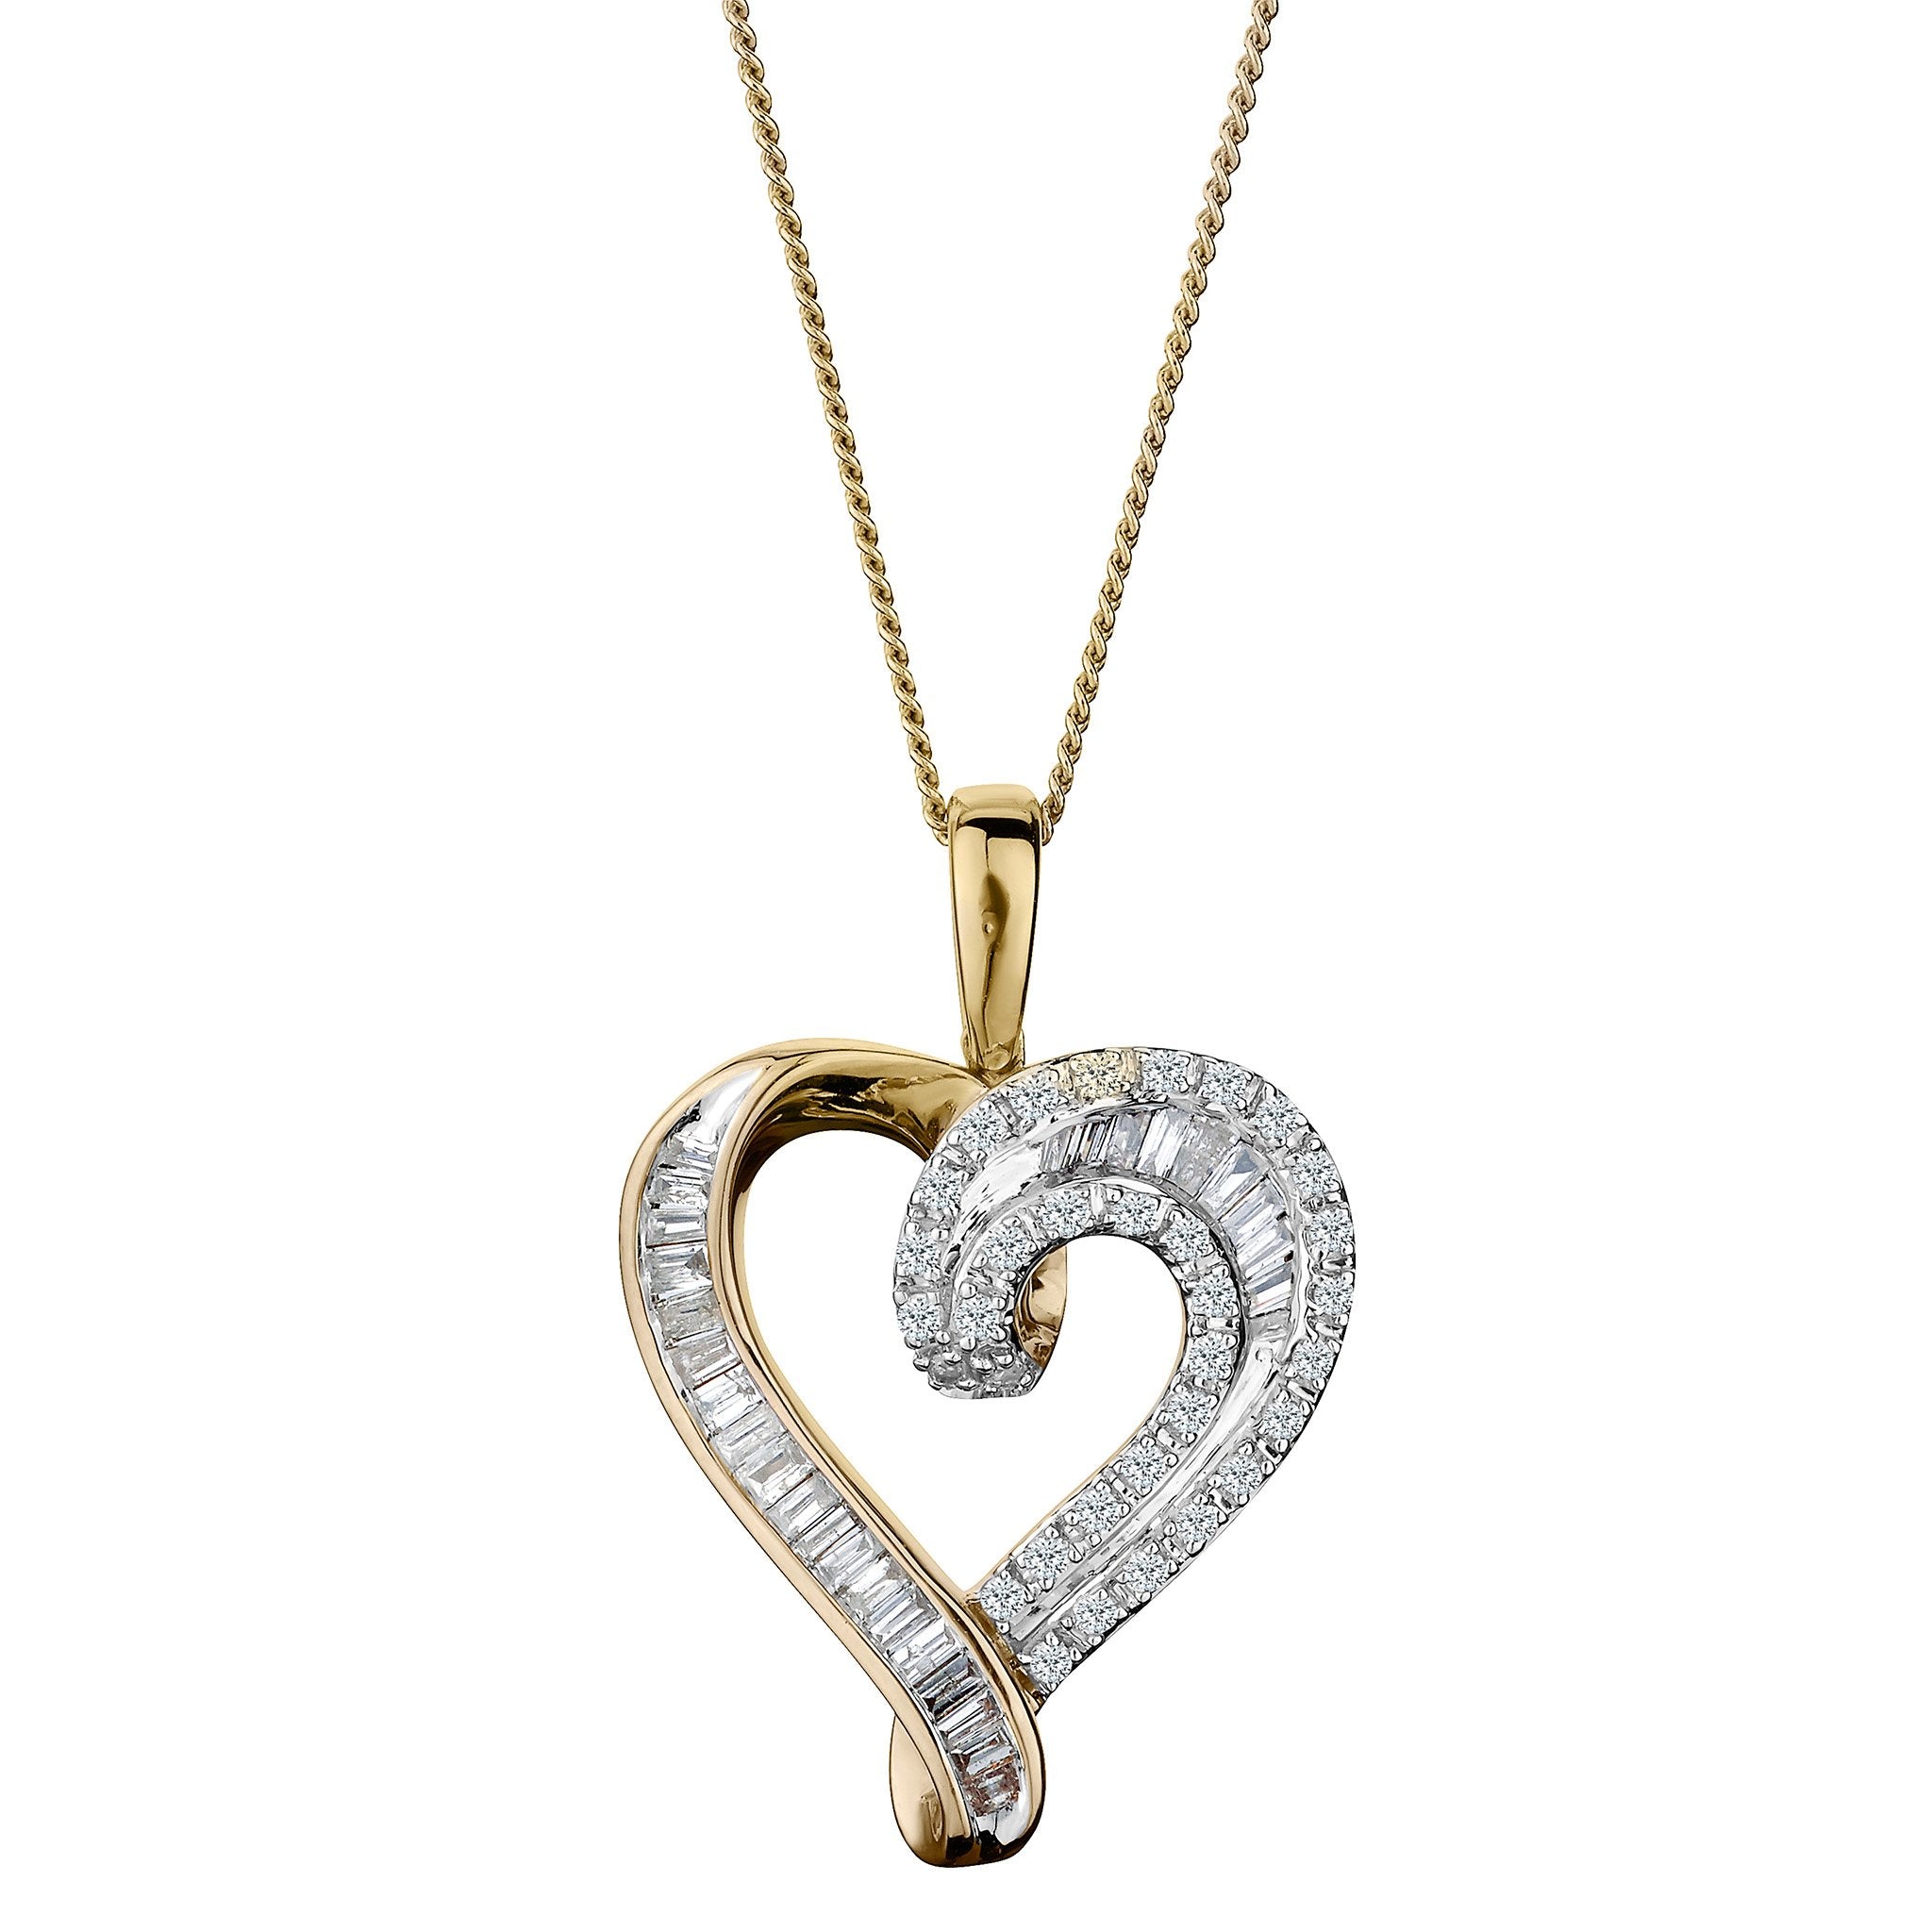 .33 Carat Diamond Heart Pendant,  10kt Yellow Gold. Necklaces and Pendants. Griffin Jewellery Designs. 